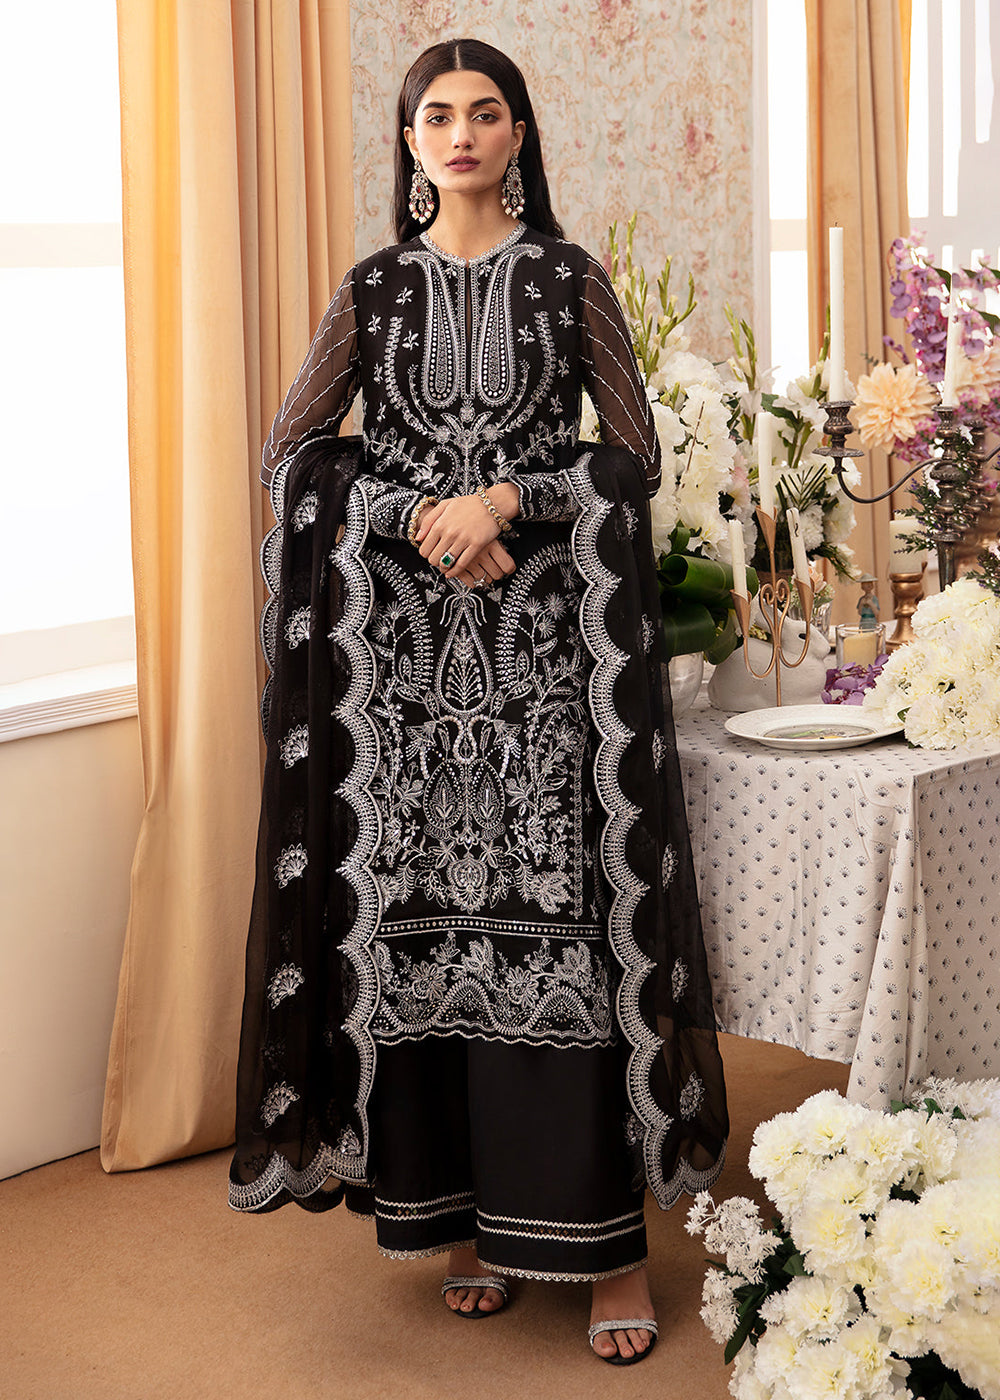 Buy Now The Whispers of Grandeur Luxury Formals '24 by Ayzel | ESME Online at Empress Online in USA, UK, Canada & Worldwide at Empress Clothing.